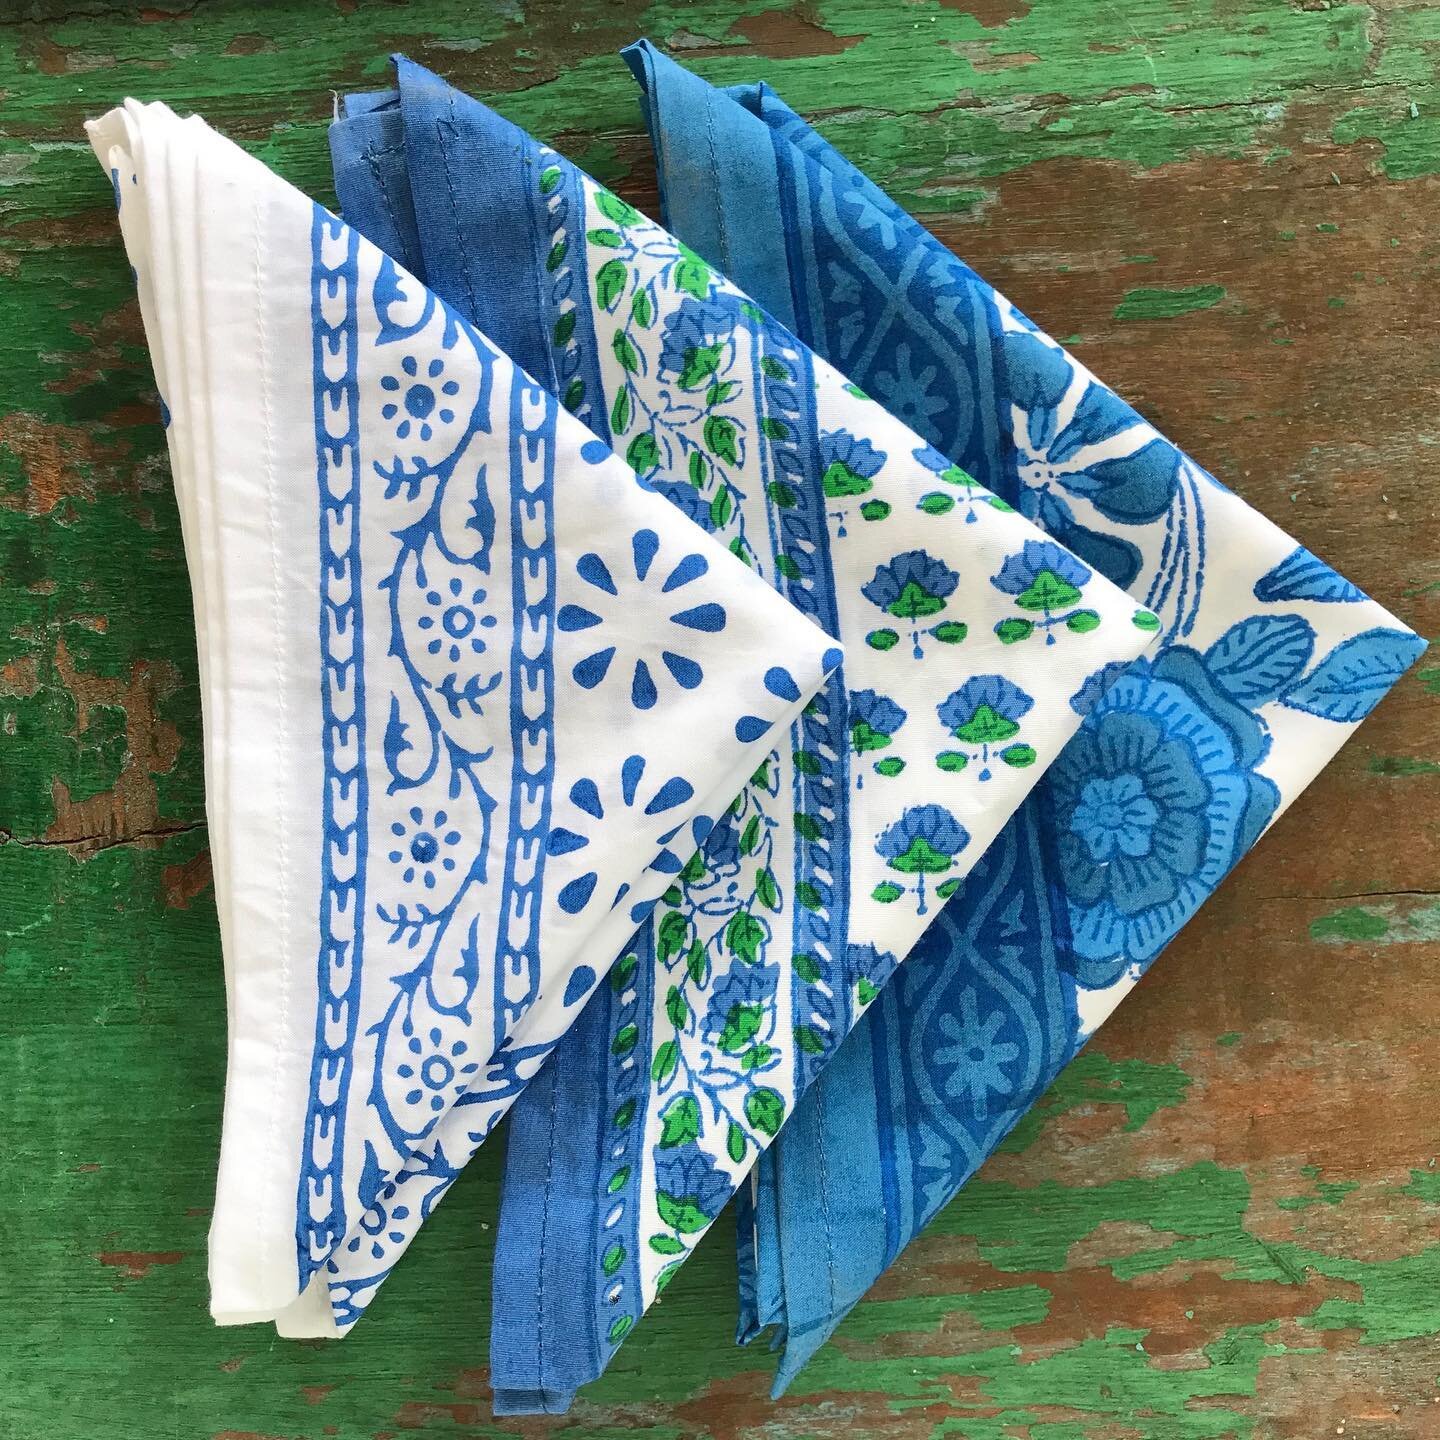 Napkins hand block printed on organic cotton that has been grown without harming the farmer or the earth with fungicides and pesticides, nor harmed the dyer or the earth using heavy metal dyes. Their unusual story is sure to inspire conversation arou